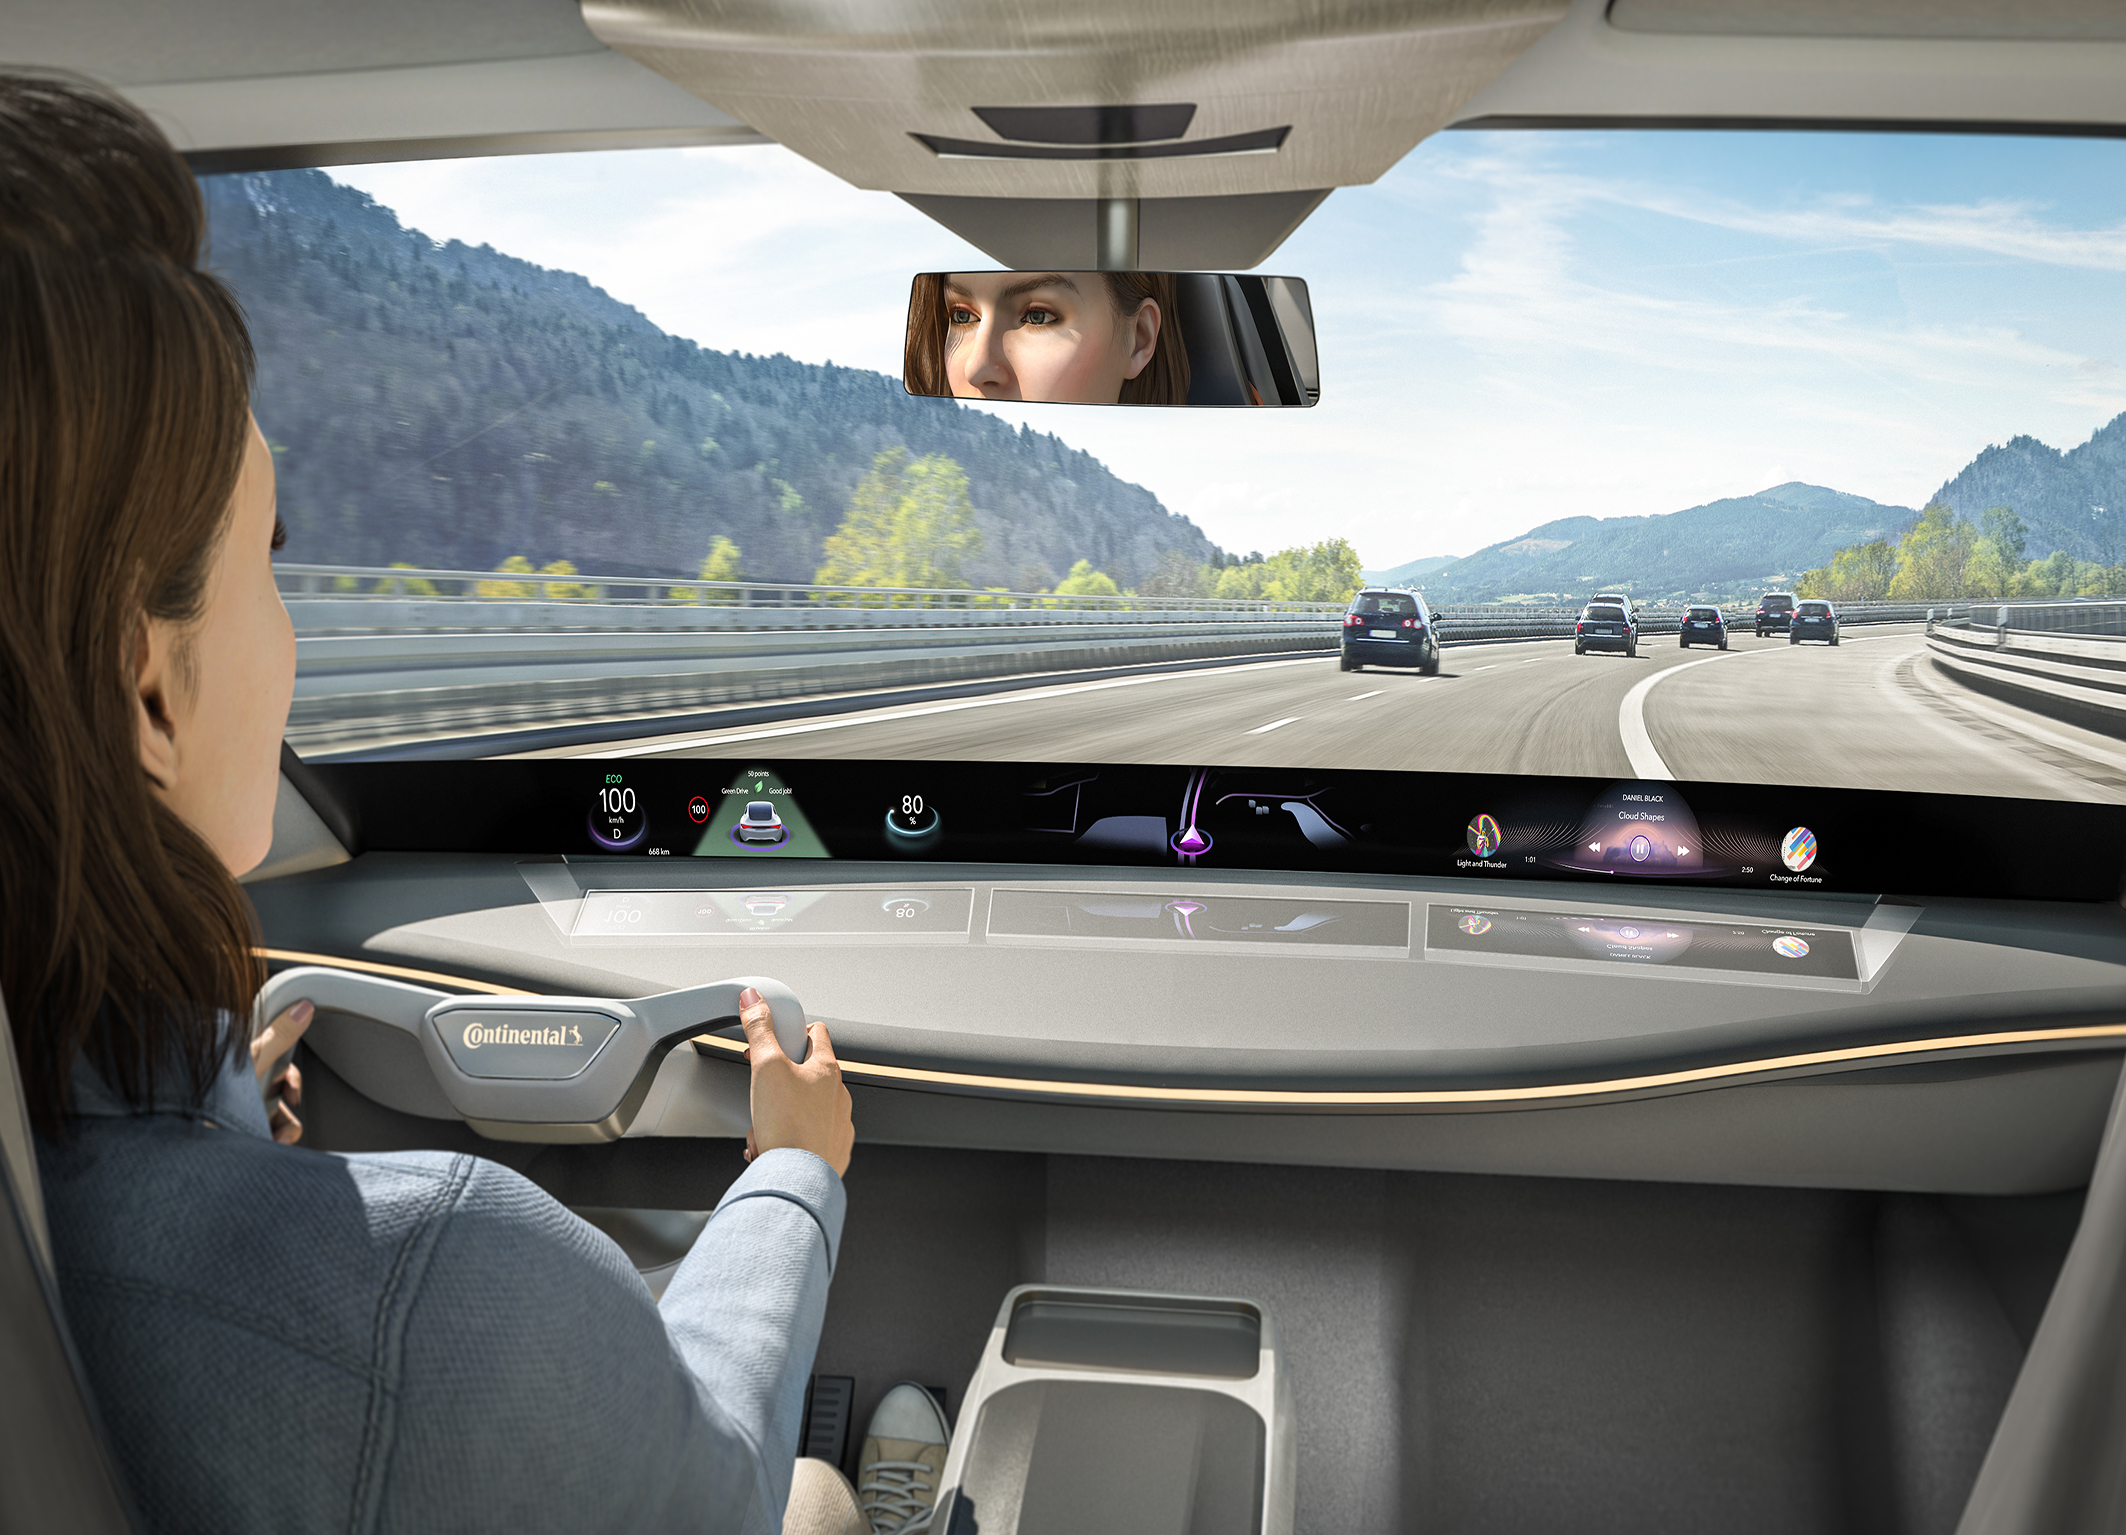 Auto Head-Up Display Projection on Glass Car Speed Windshield